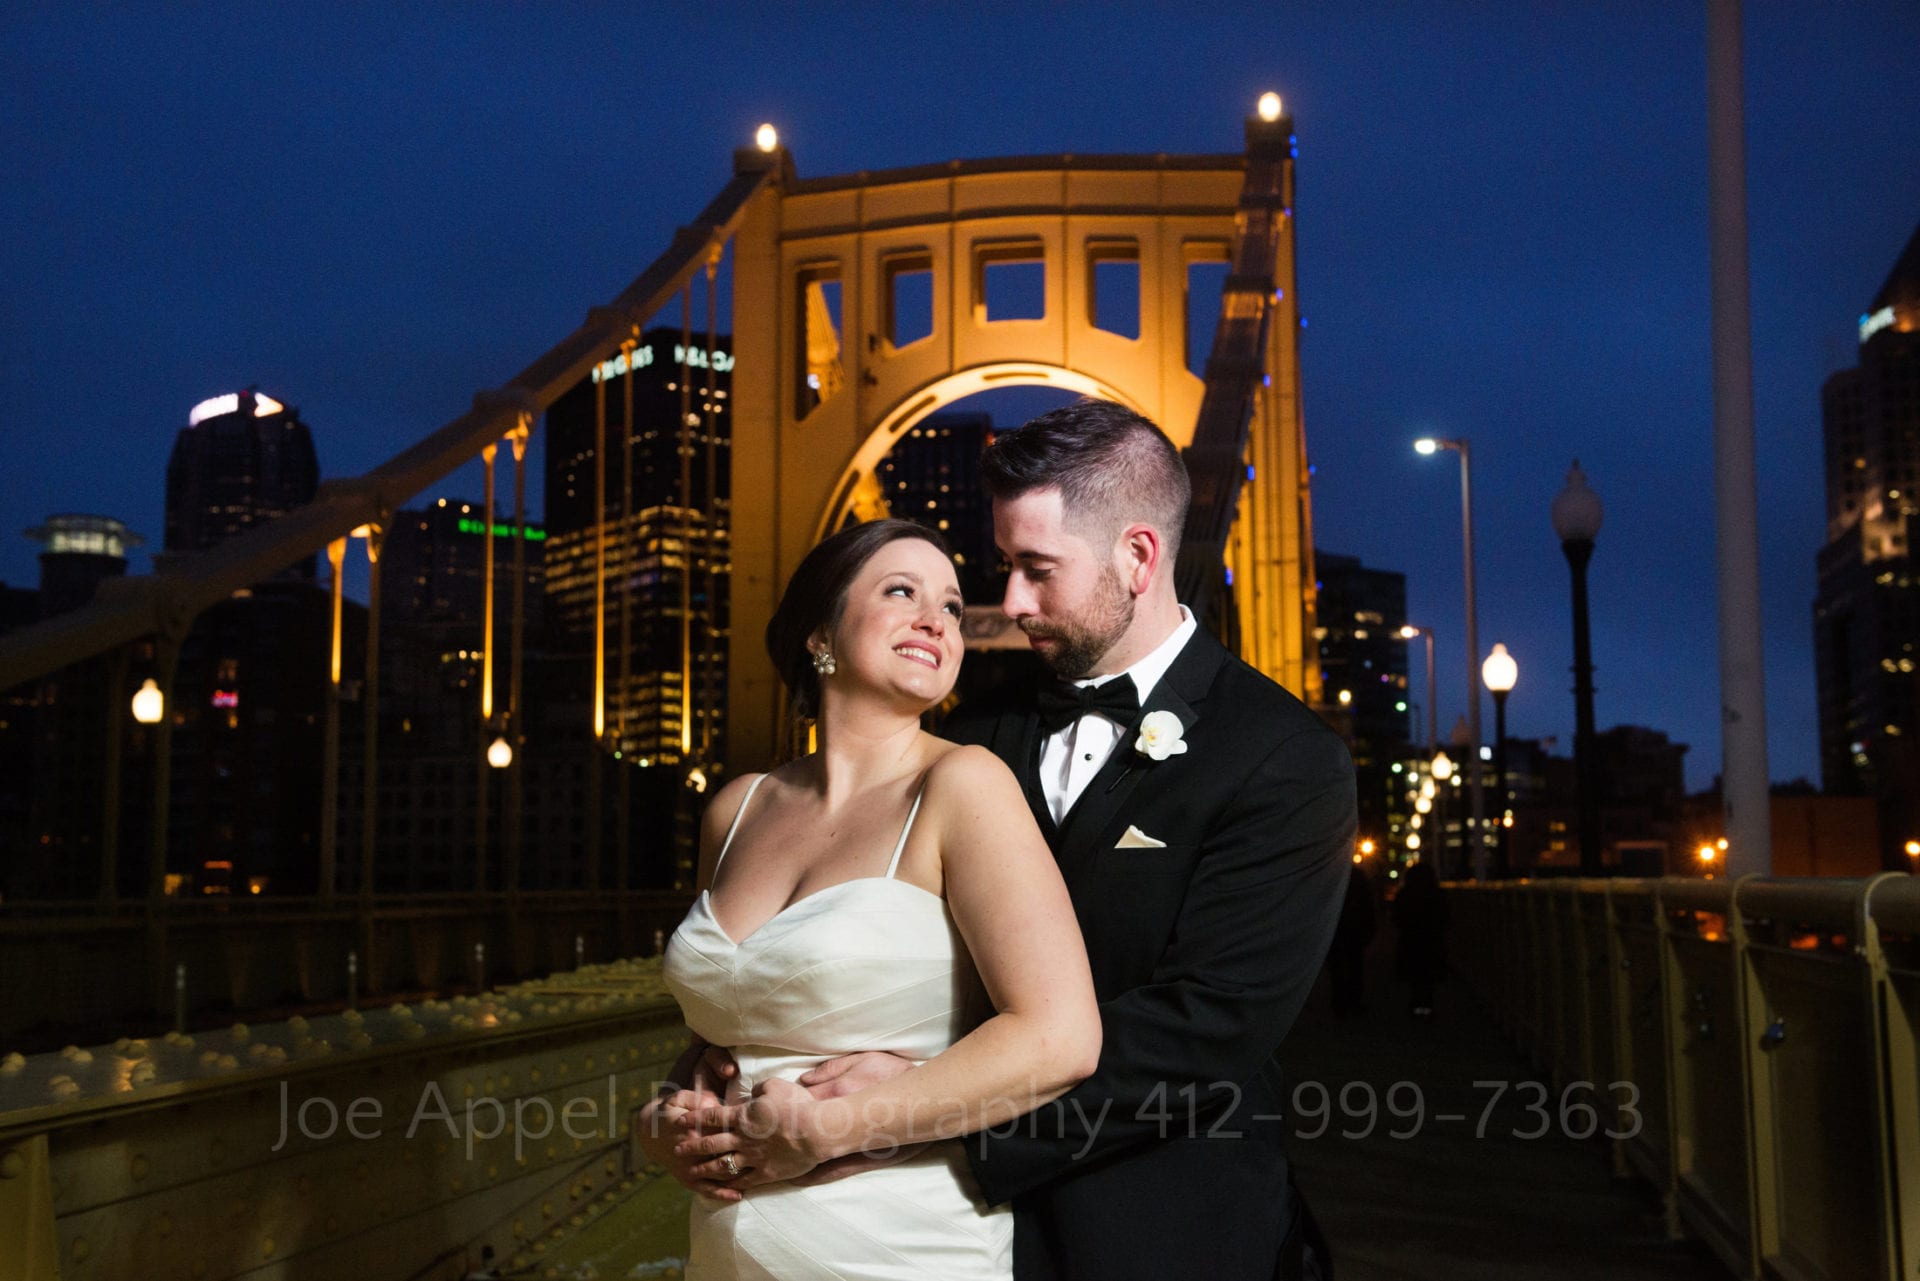 A bride looks back at her groom as he holds her from behind in front of the Roberto Clemente Bridge. The skyline of downtown Pittsburgh is behind the bridge.